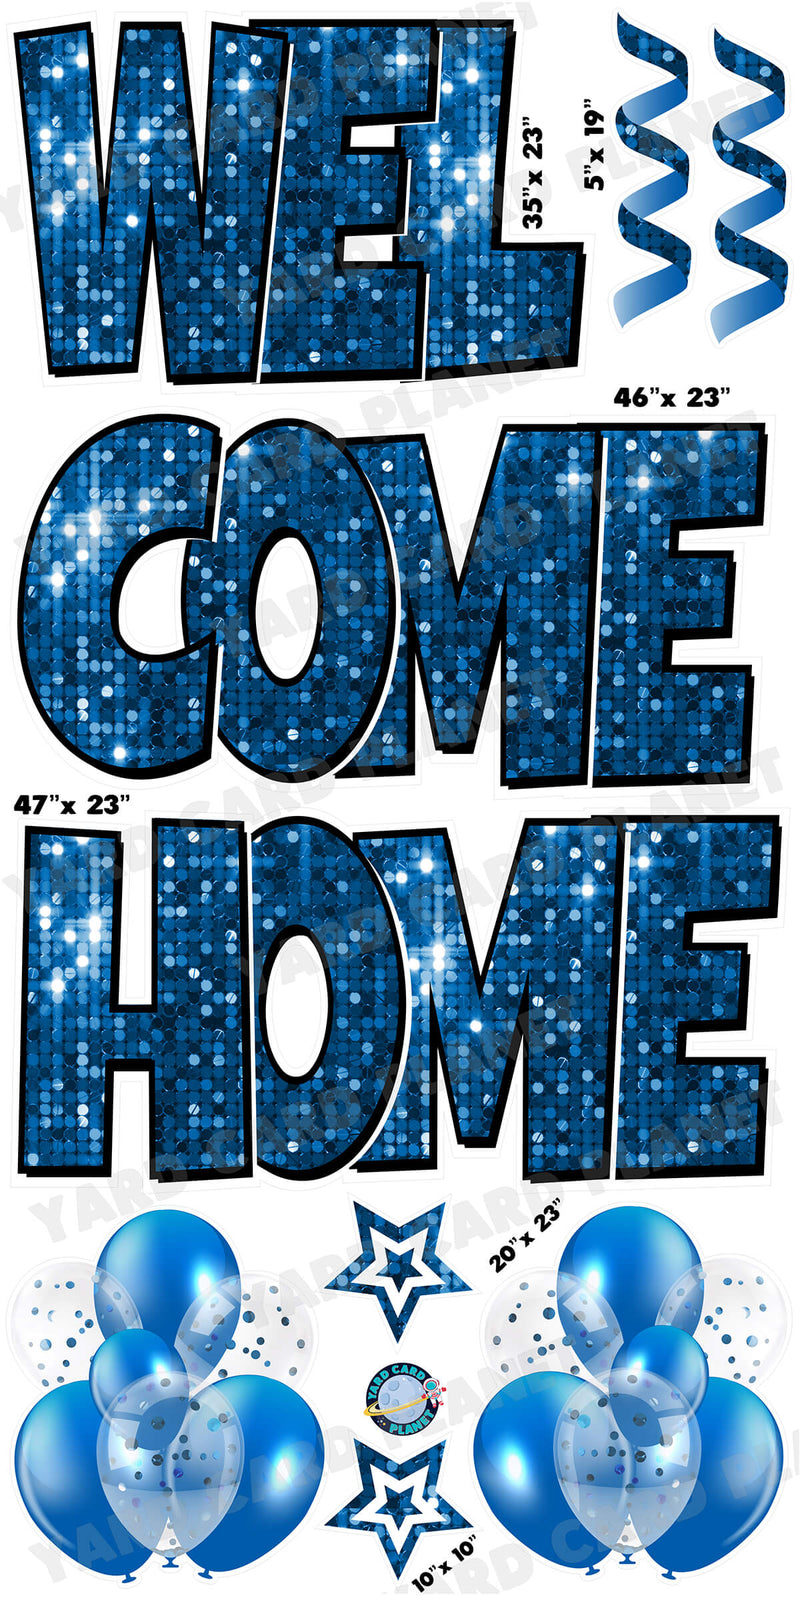 Large 23" Welcome Home Yard Card EZ Quick Sets in Luckiest Guy Font and Flair in Blue Sequin Pattern